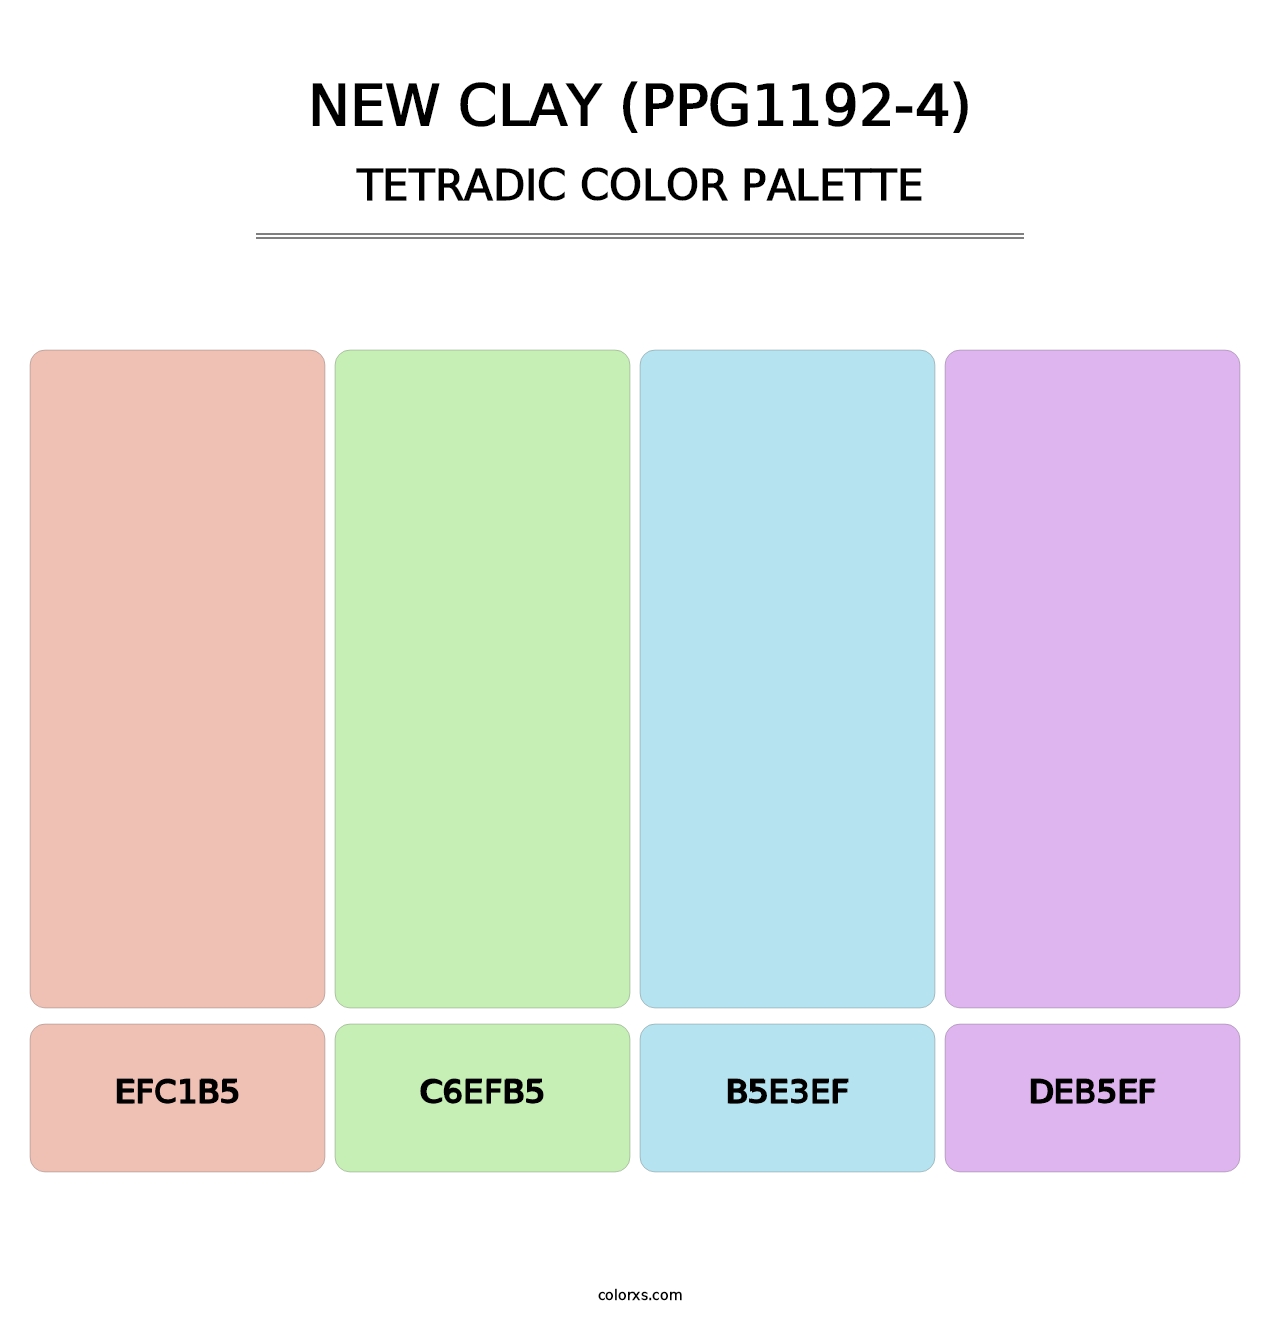 New Clay (PPG1192-4) - Tetradic Color Palette